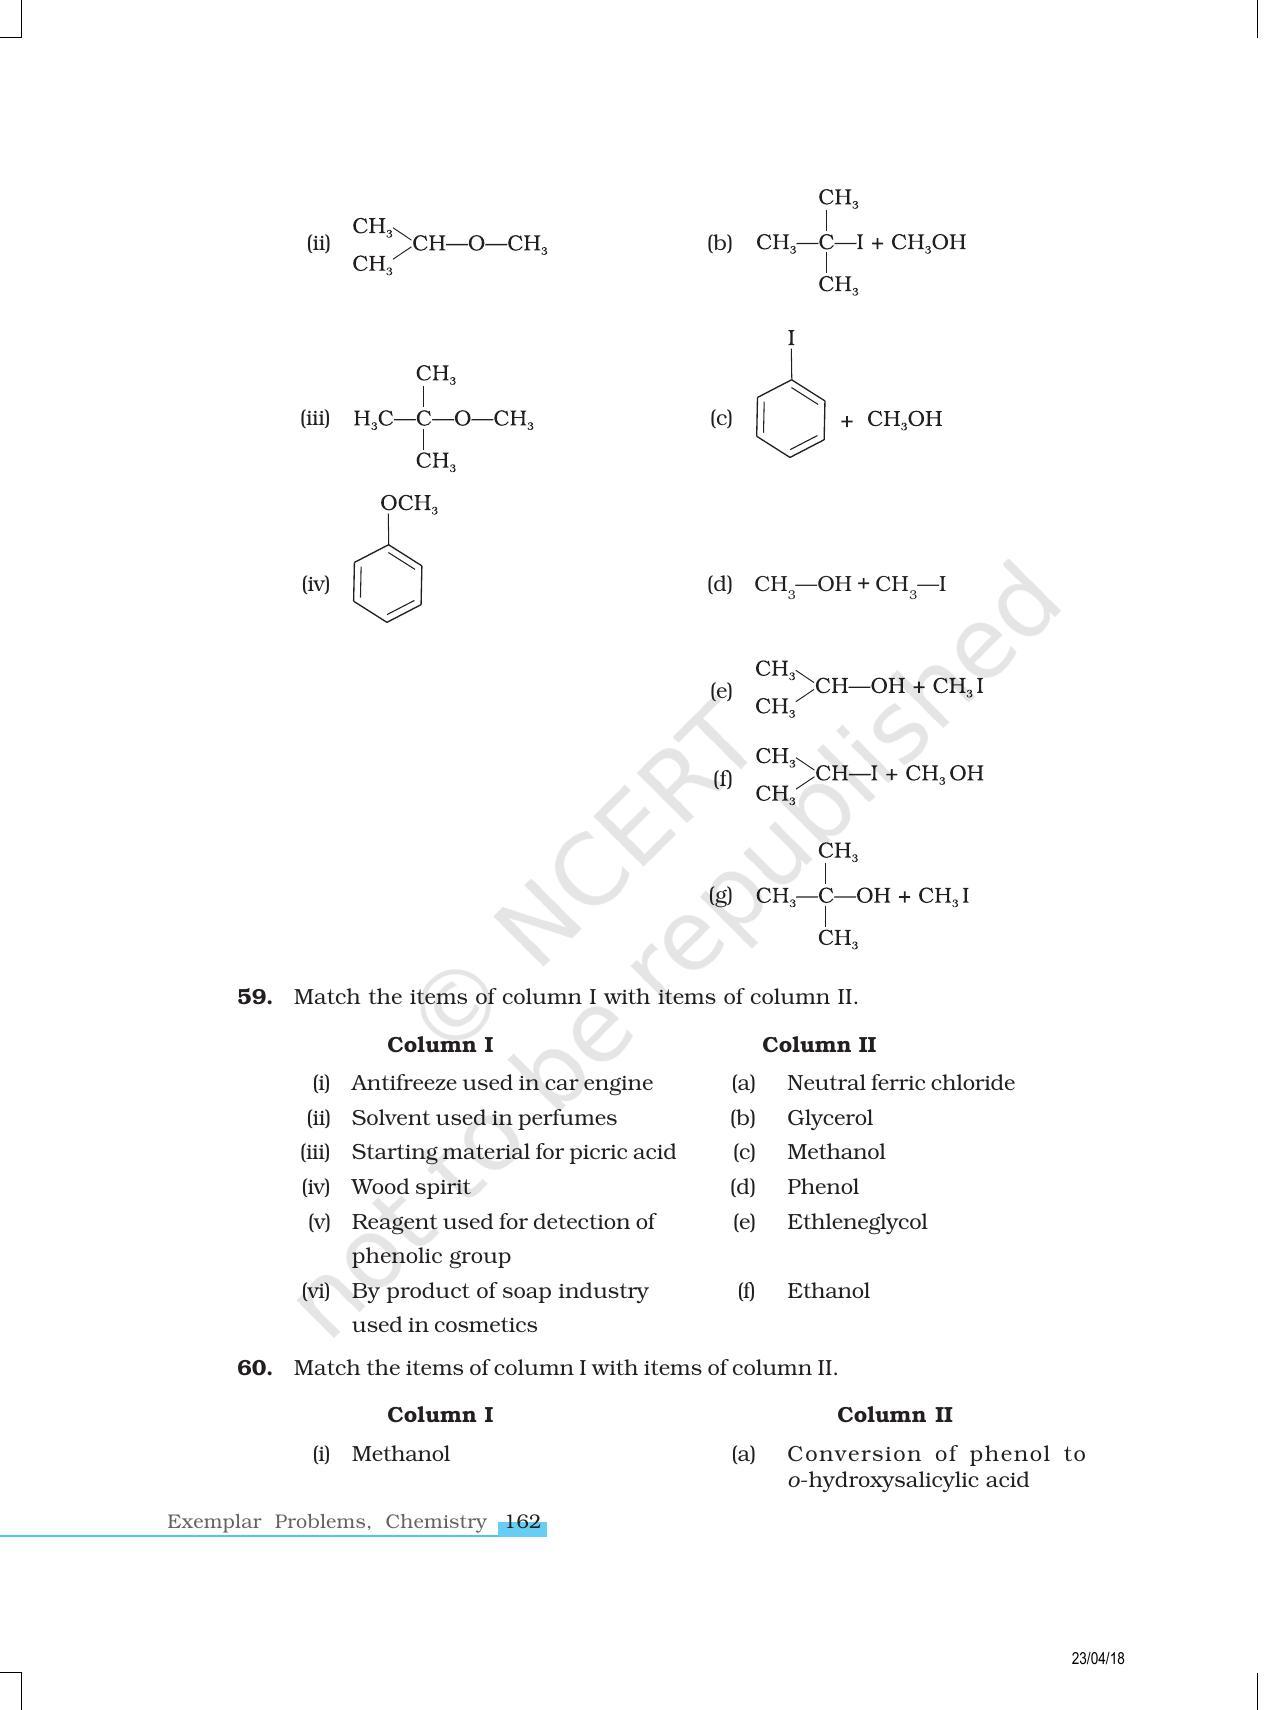 NCERT Exemplar Book for Class 12 Chemistry: Chapter 11 Alcohols, Phenols and Ethers - Page 9